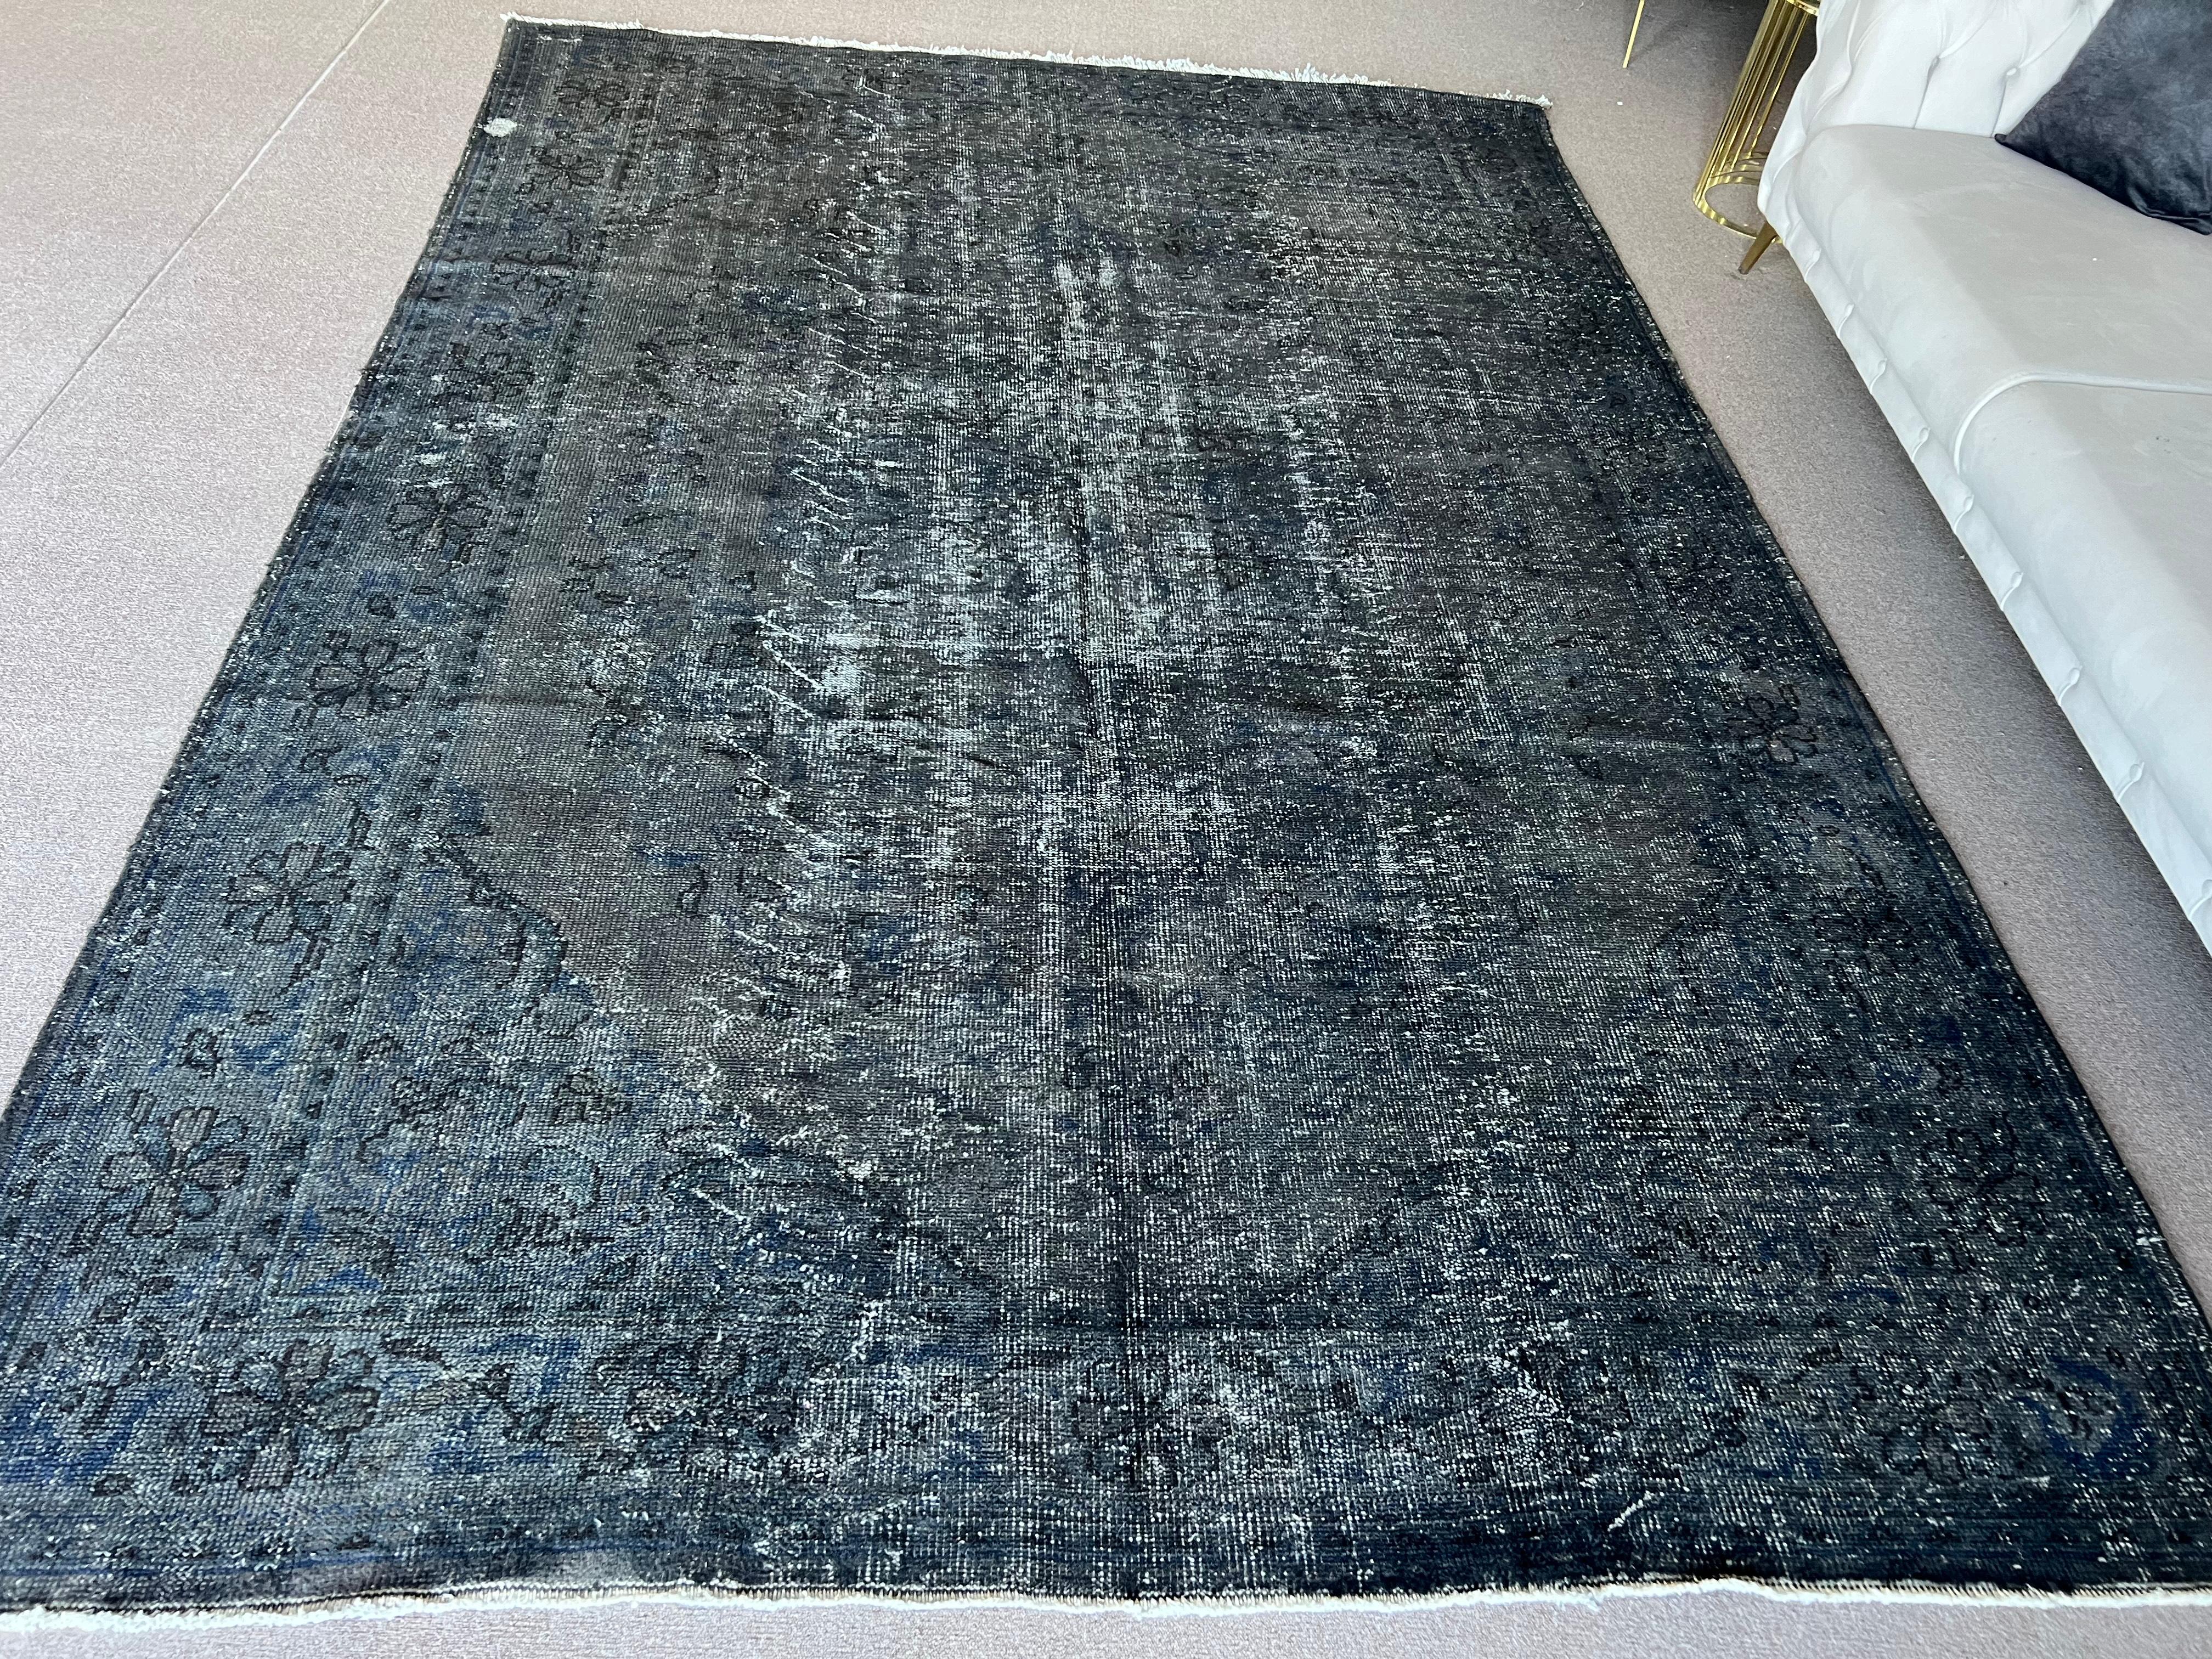 7.6x11.4 Ft Vintage Distressed Handmade Turkish Large Rug in Taupe & Black Color In Good Condition For Sale In Philadelphia, PA